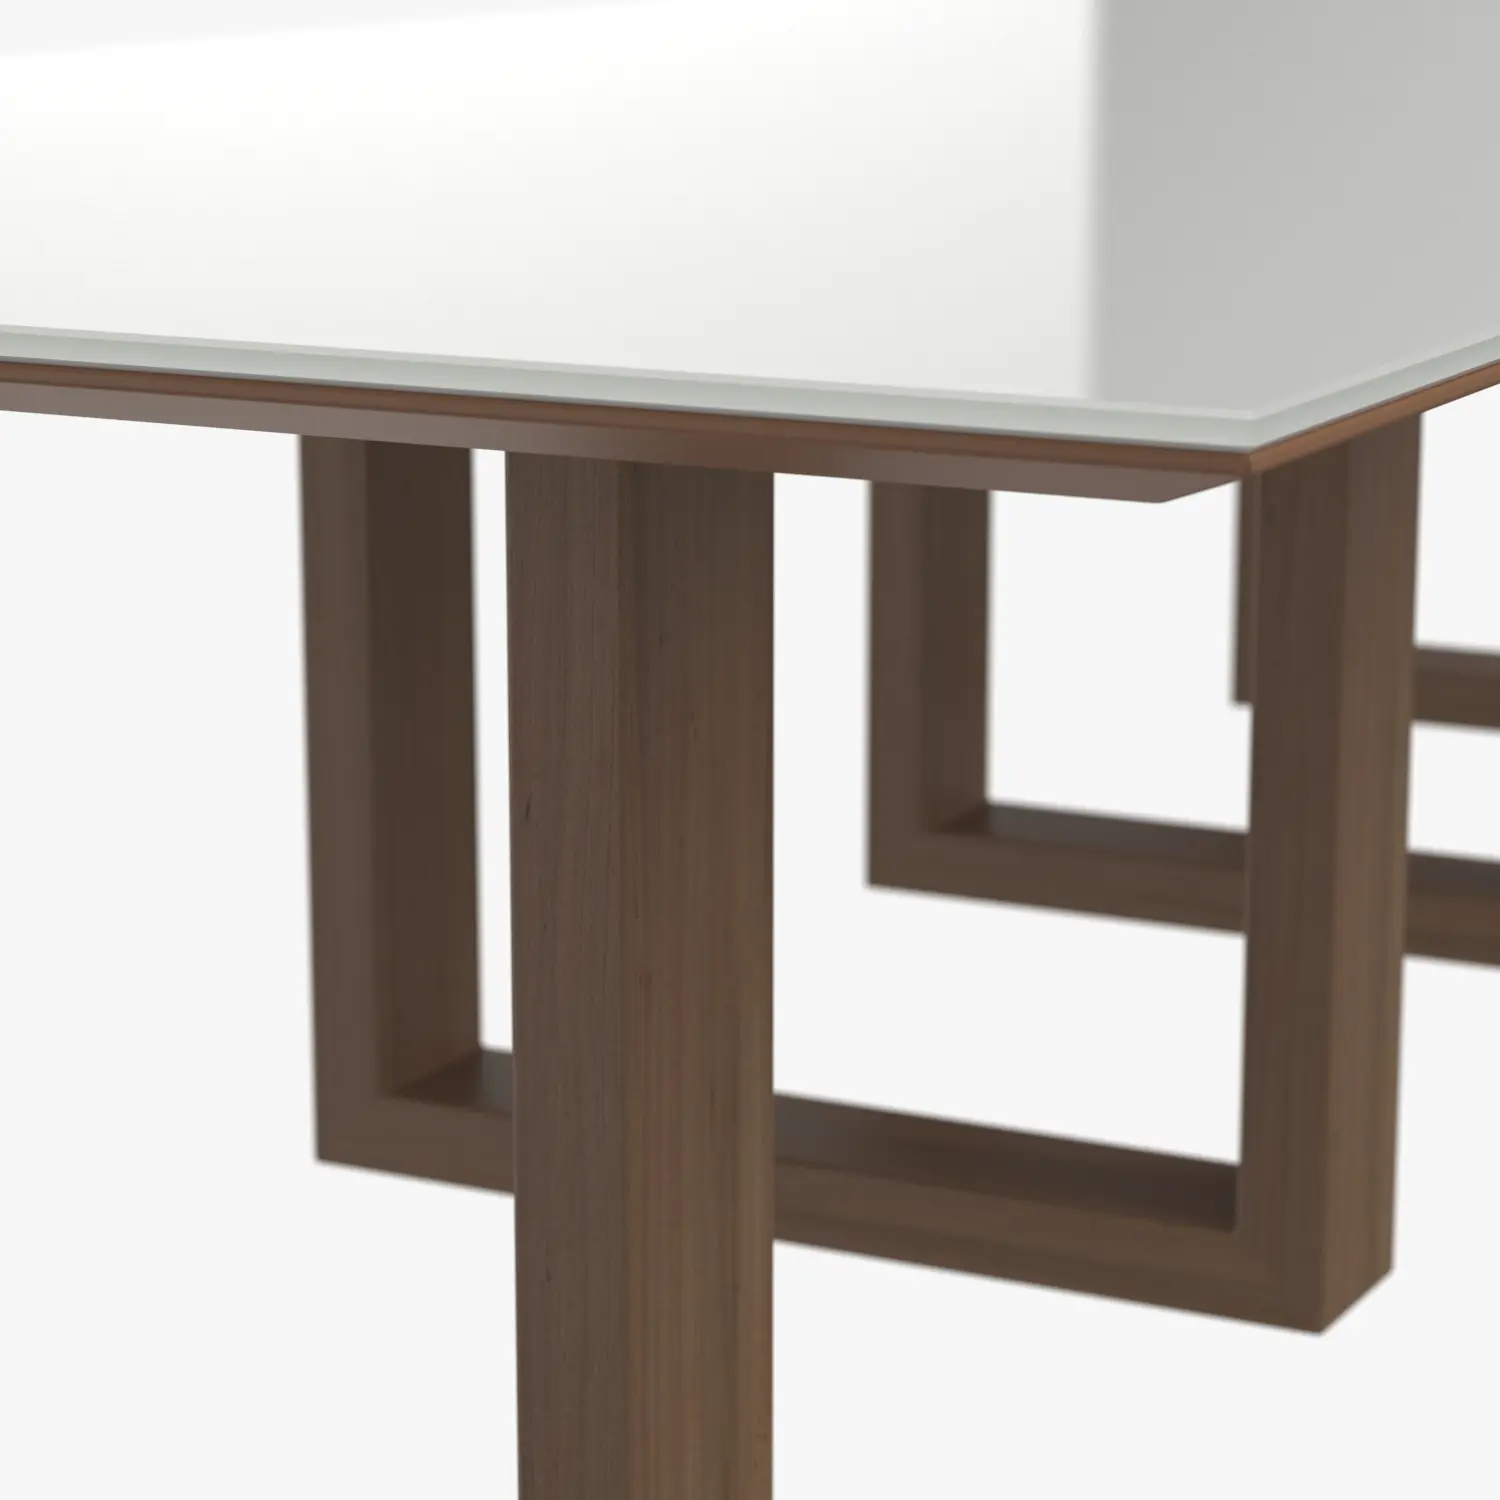 Statement Blends Natural Finishes Conference Table 3D Model_05